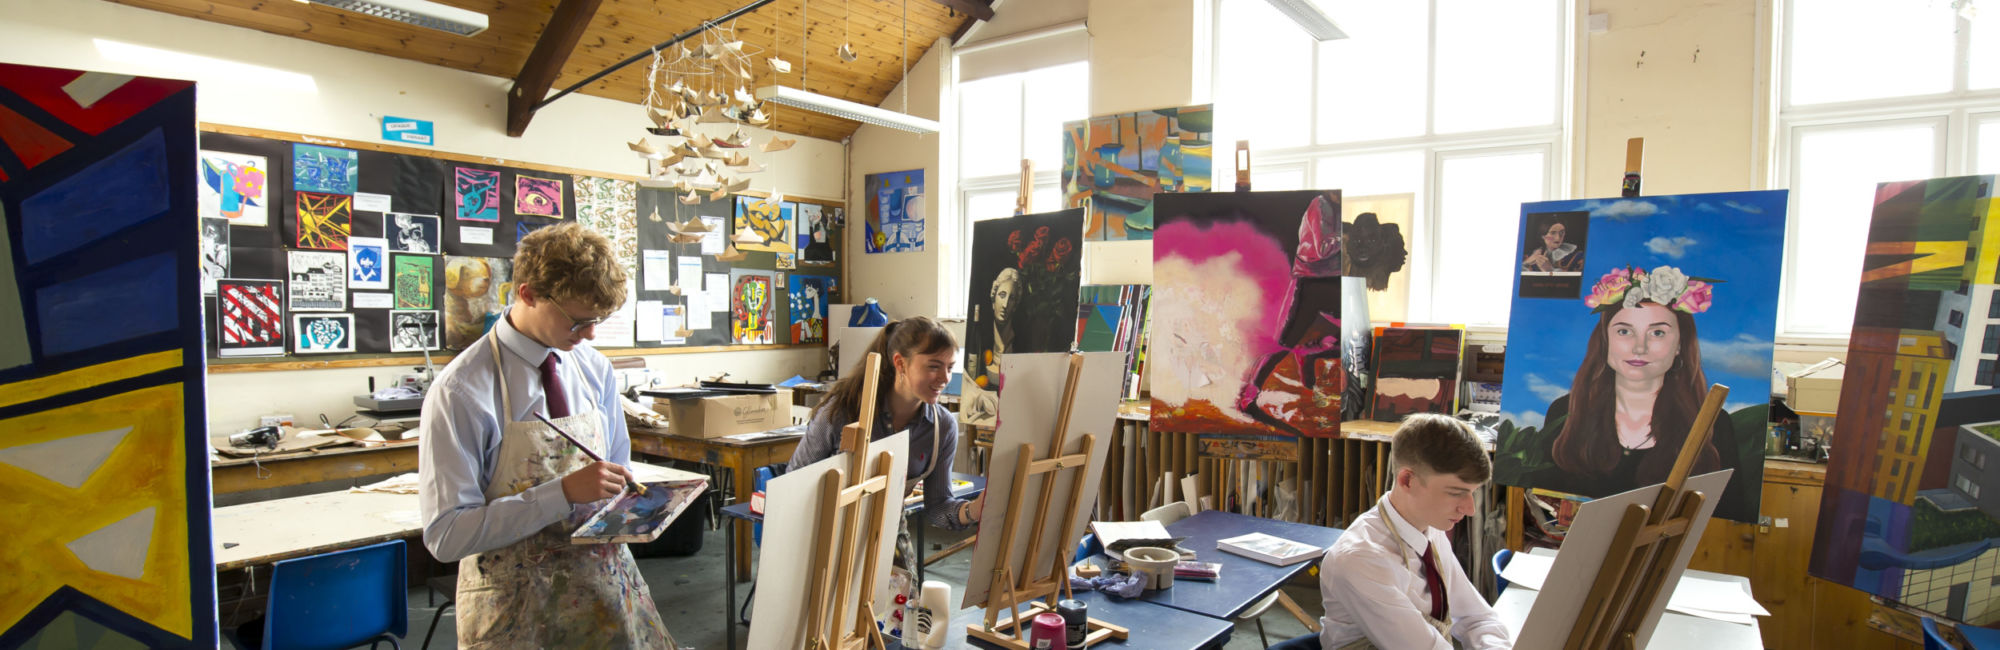 wycliffe senior pupils painting in art class